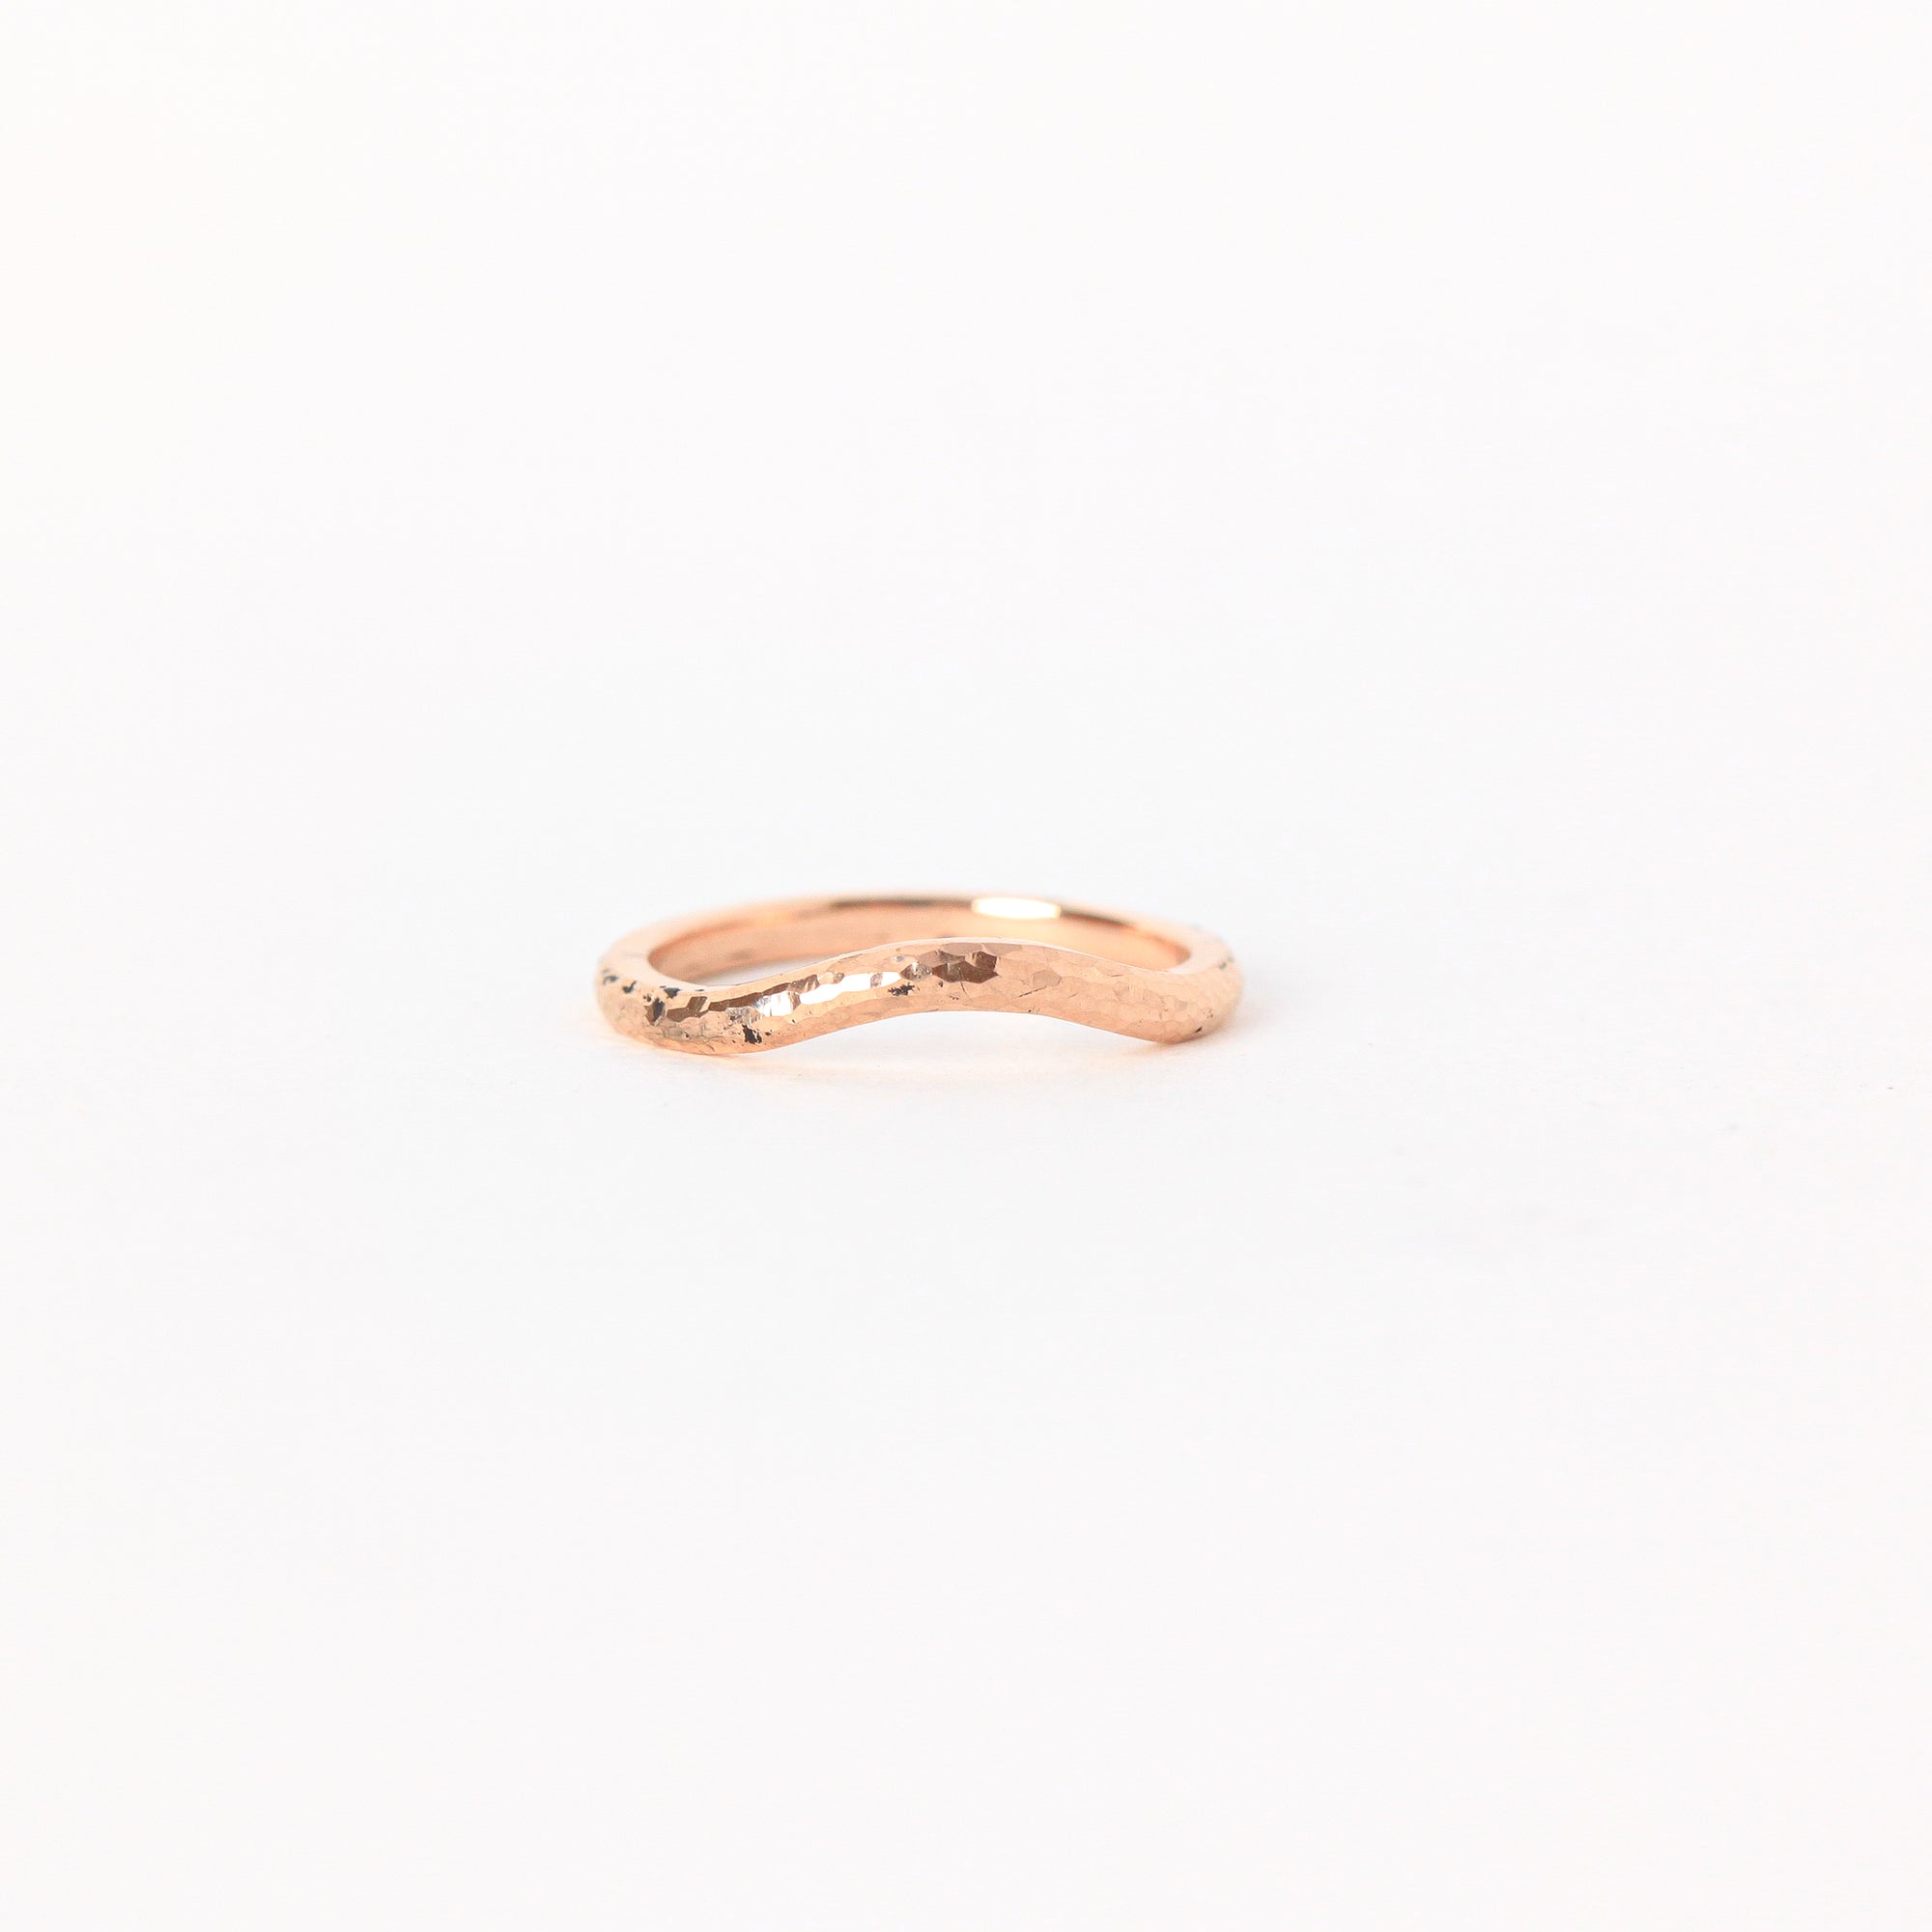 Handmade 18ct Rose Gold Curved Wedding Band